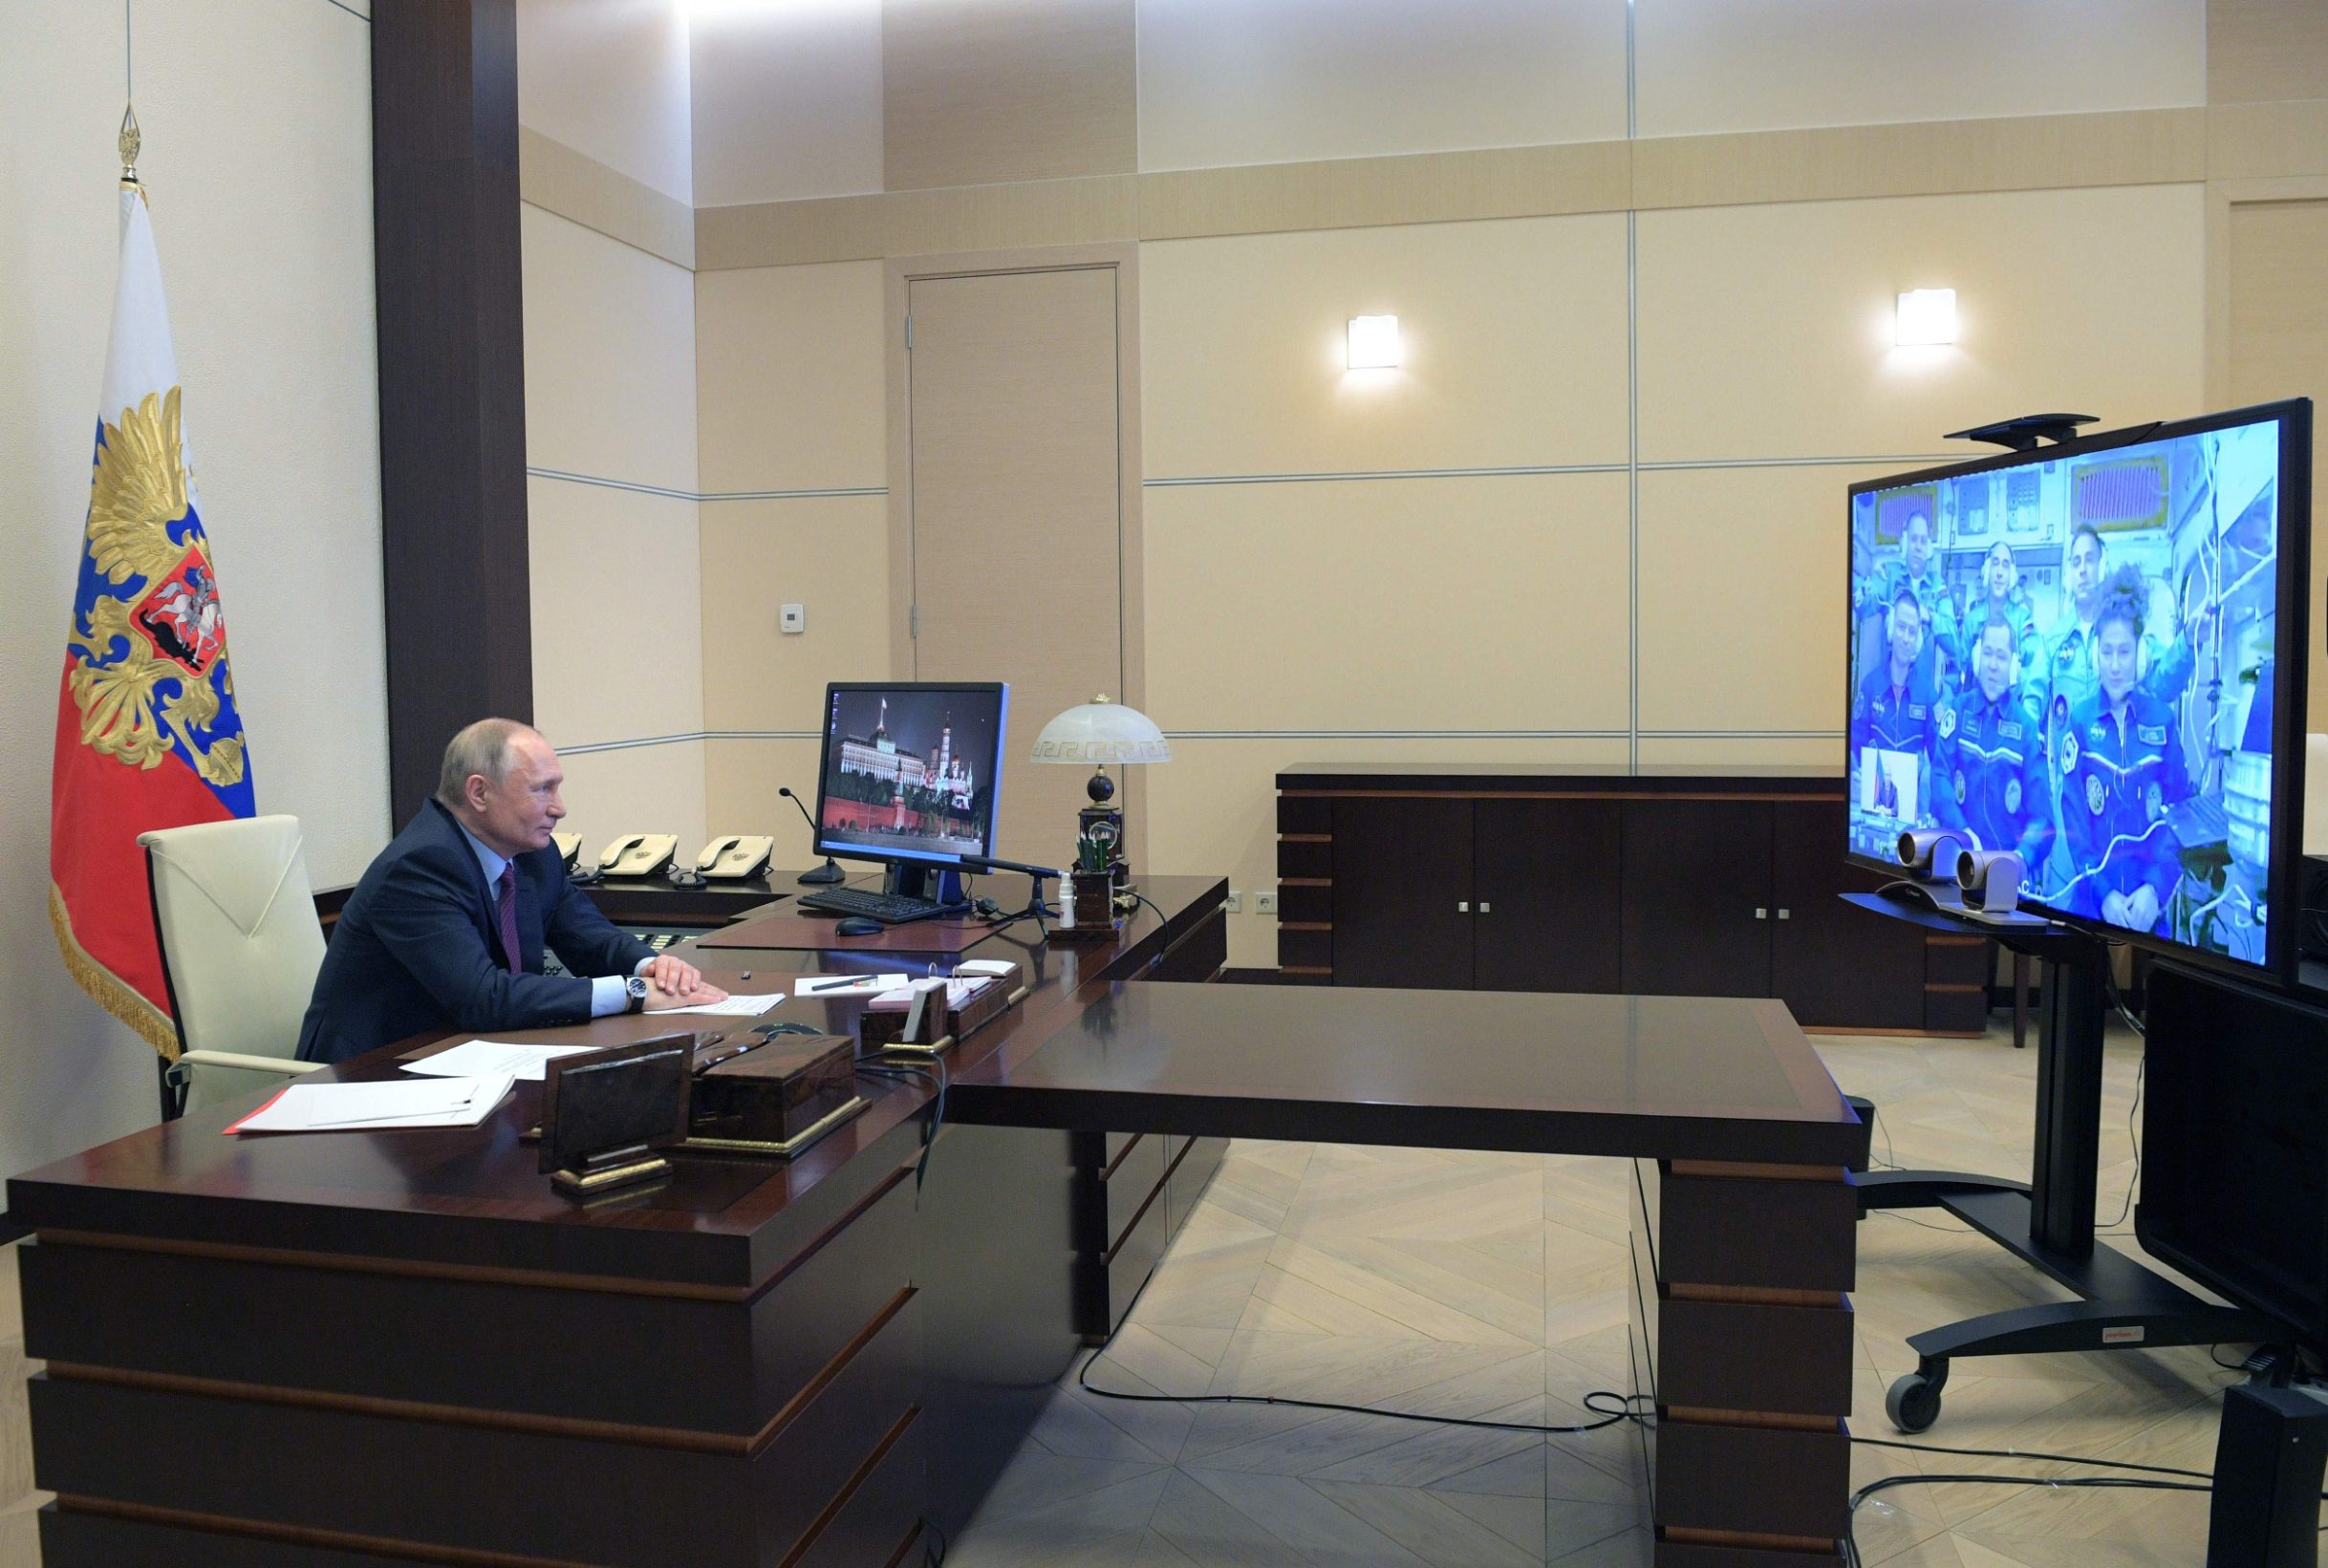 Russian President Vladimir Putin holds a video link with cosmonauts onboard the International Space Station (ISS), at the Novo-Ogaryovo state residence outside Moscow on April 10, 2020. (Photo by Alexey DRUZHININ / SPUTNIK / AFP)